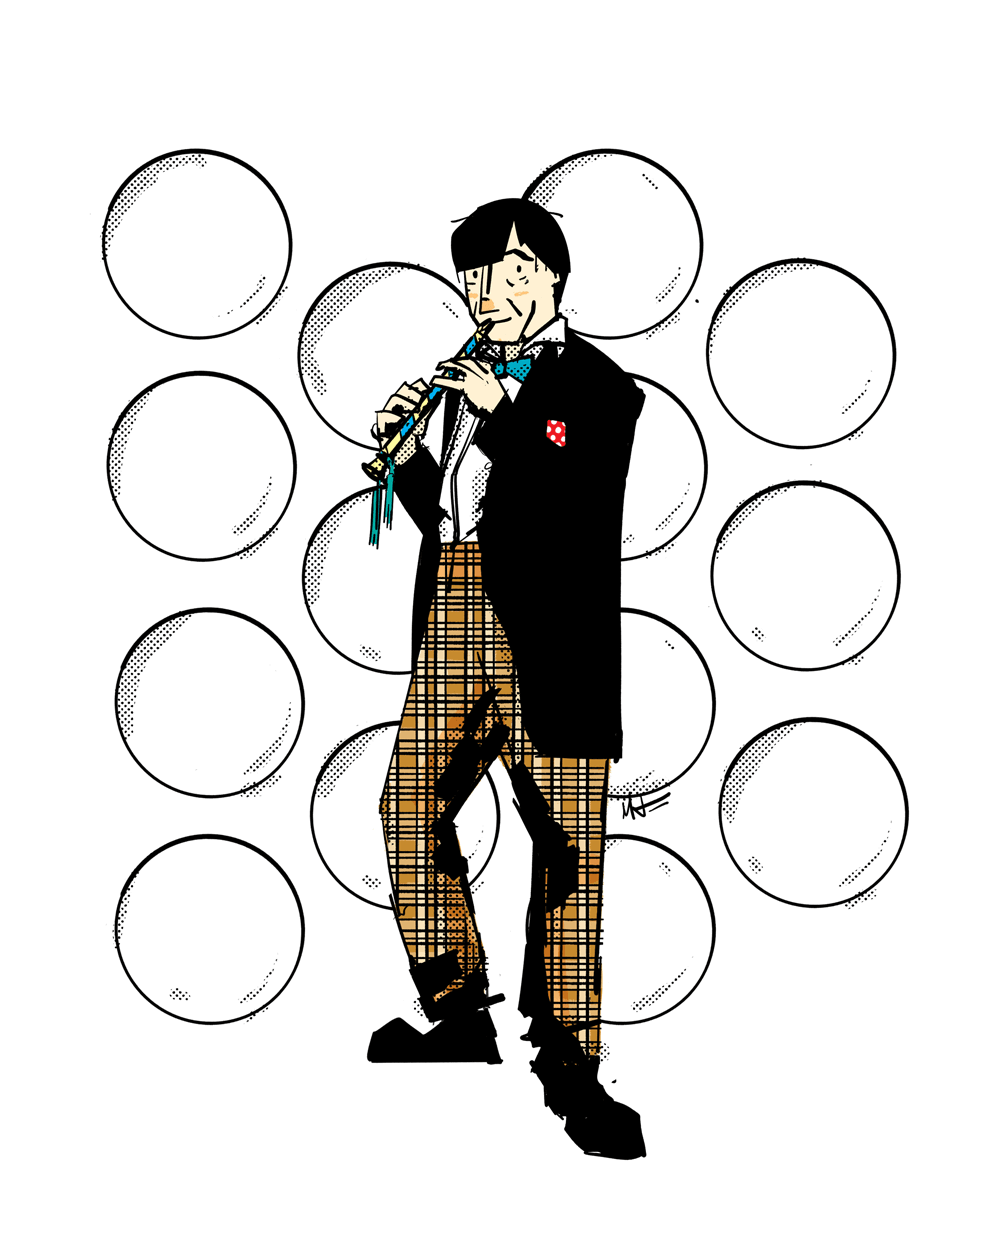 The Second Doctor Who, wearing a black jacket, a blue bowtie, and playing a recorder. He has a bowl-ish hair cut.